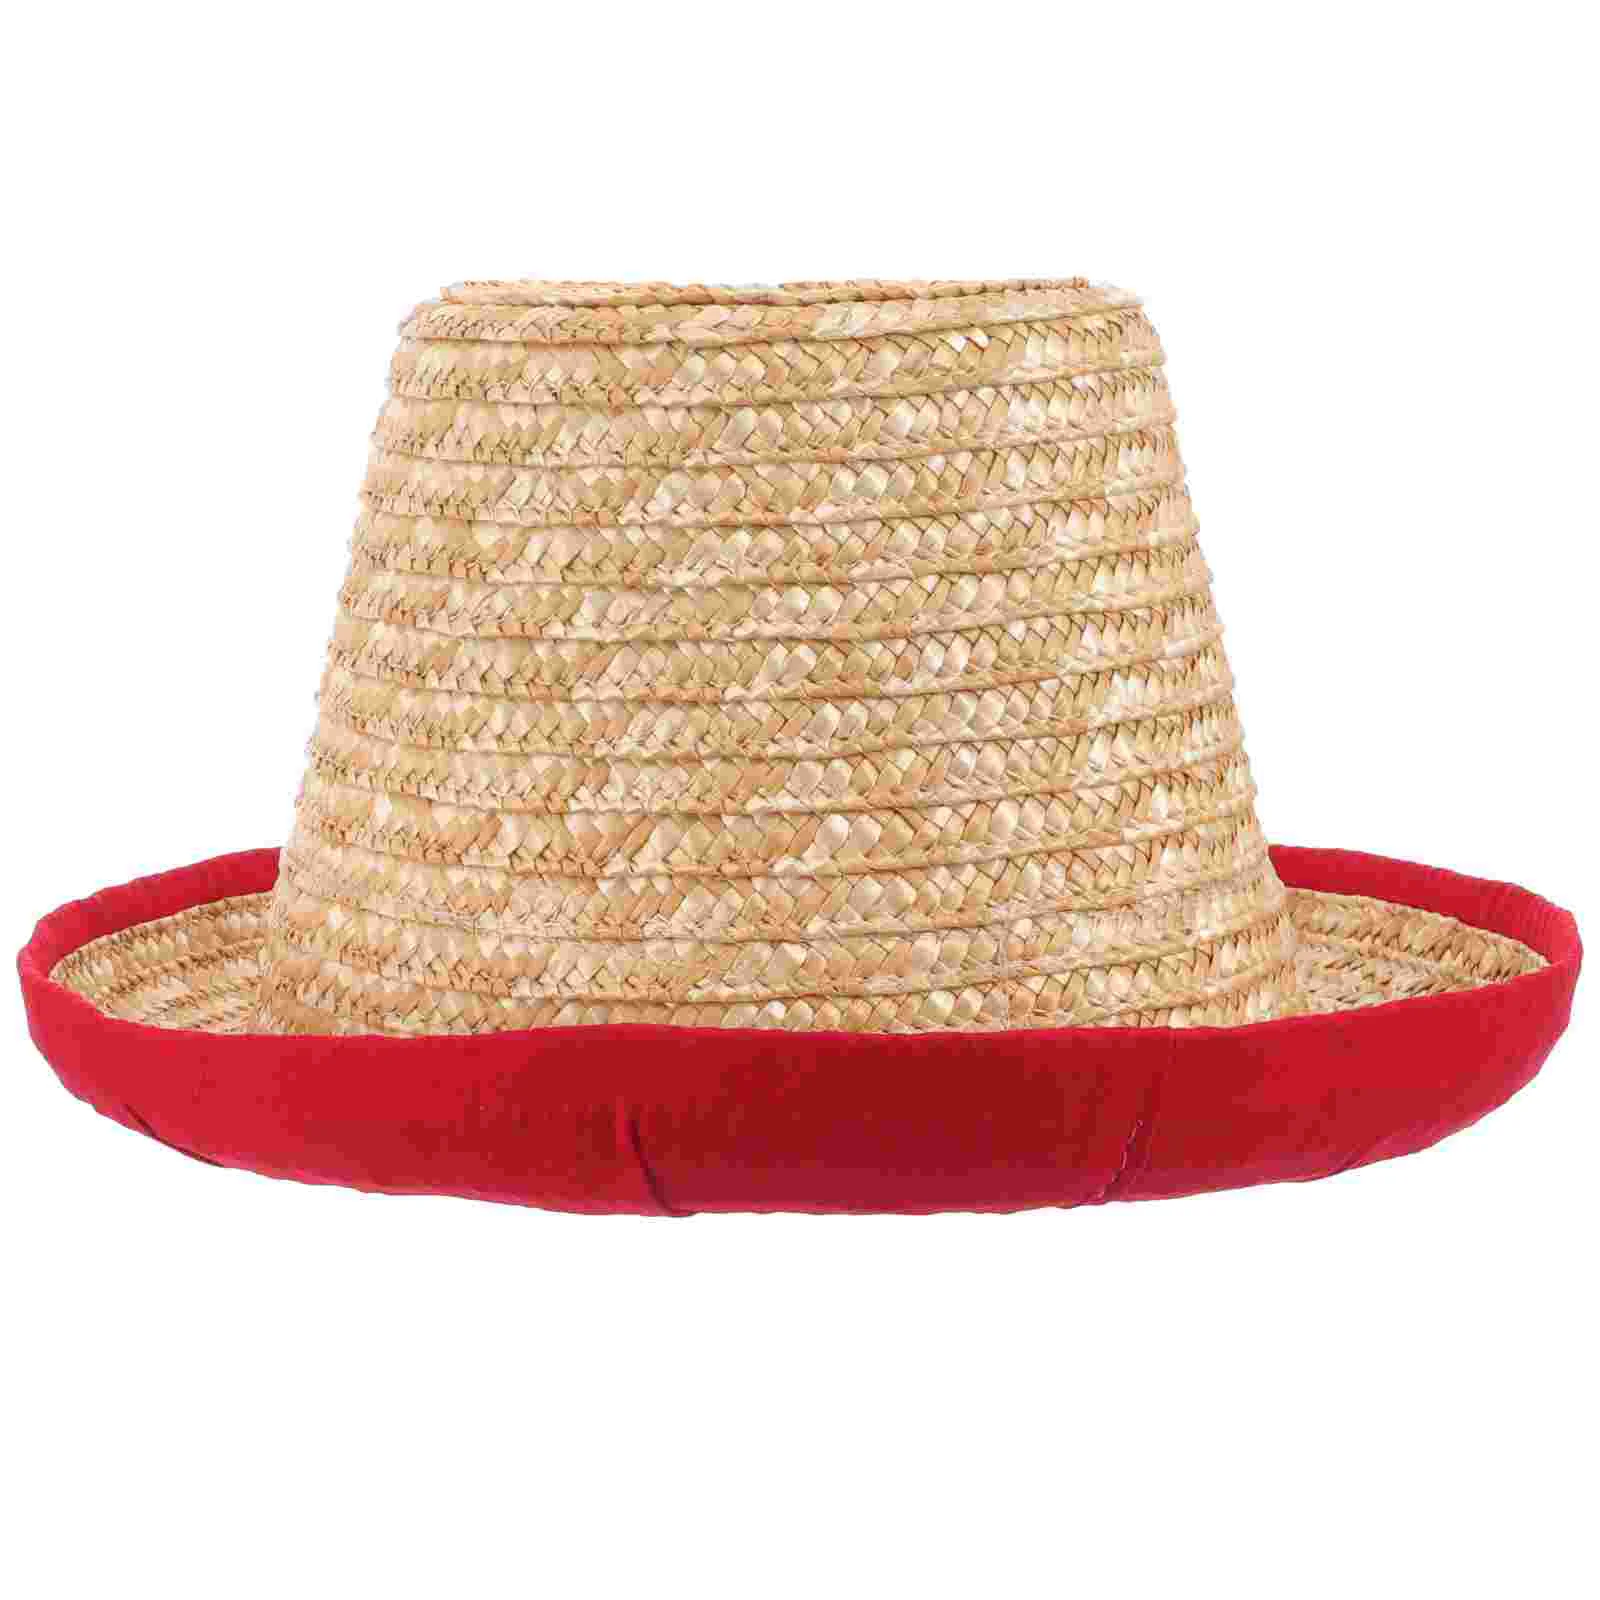 

Stunt Clowns Mexican Hat Small Cowboy Hat Straw Decor Prop Circus to Weave Stage Performance Acrobatic Grass Cotton Accessory